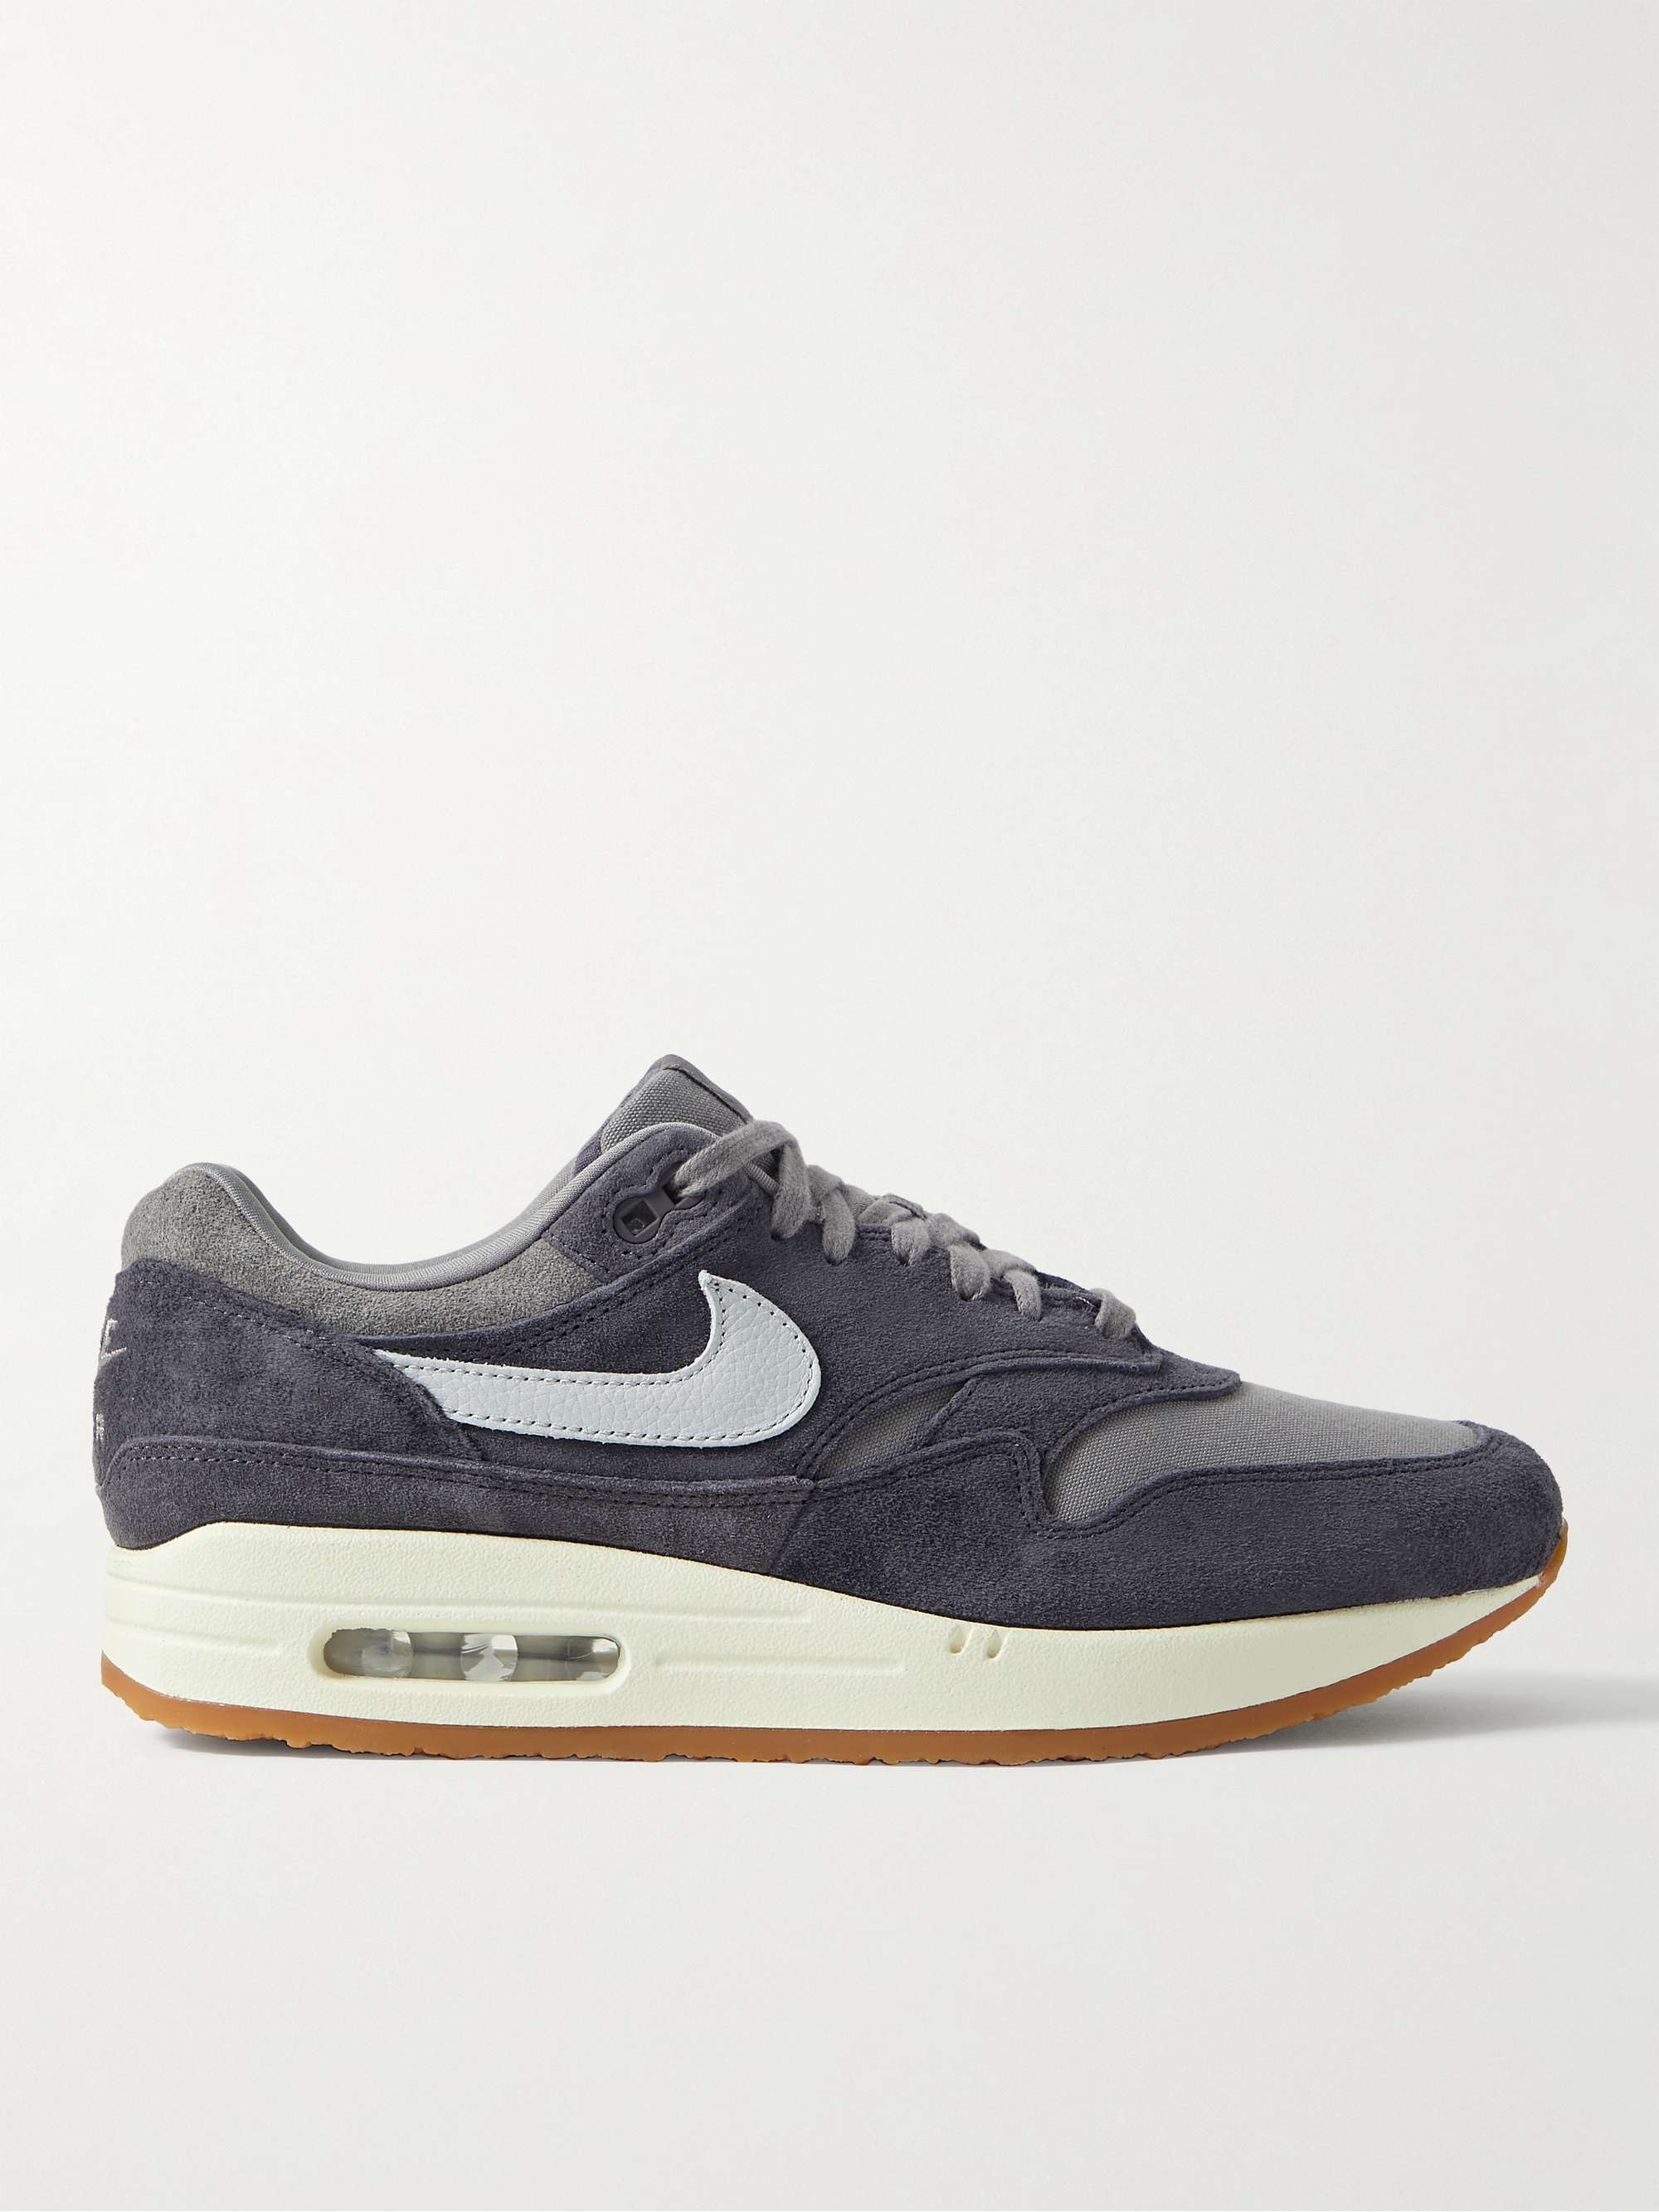 Gray Air Max 1 Leather-Trimmed Suede and Canvas Sneakers | NIKE | MR PORTER